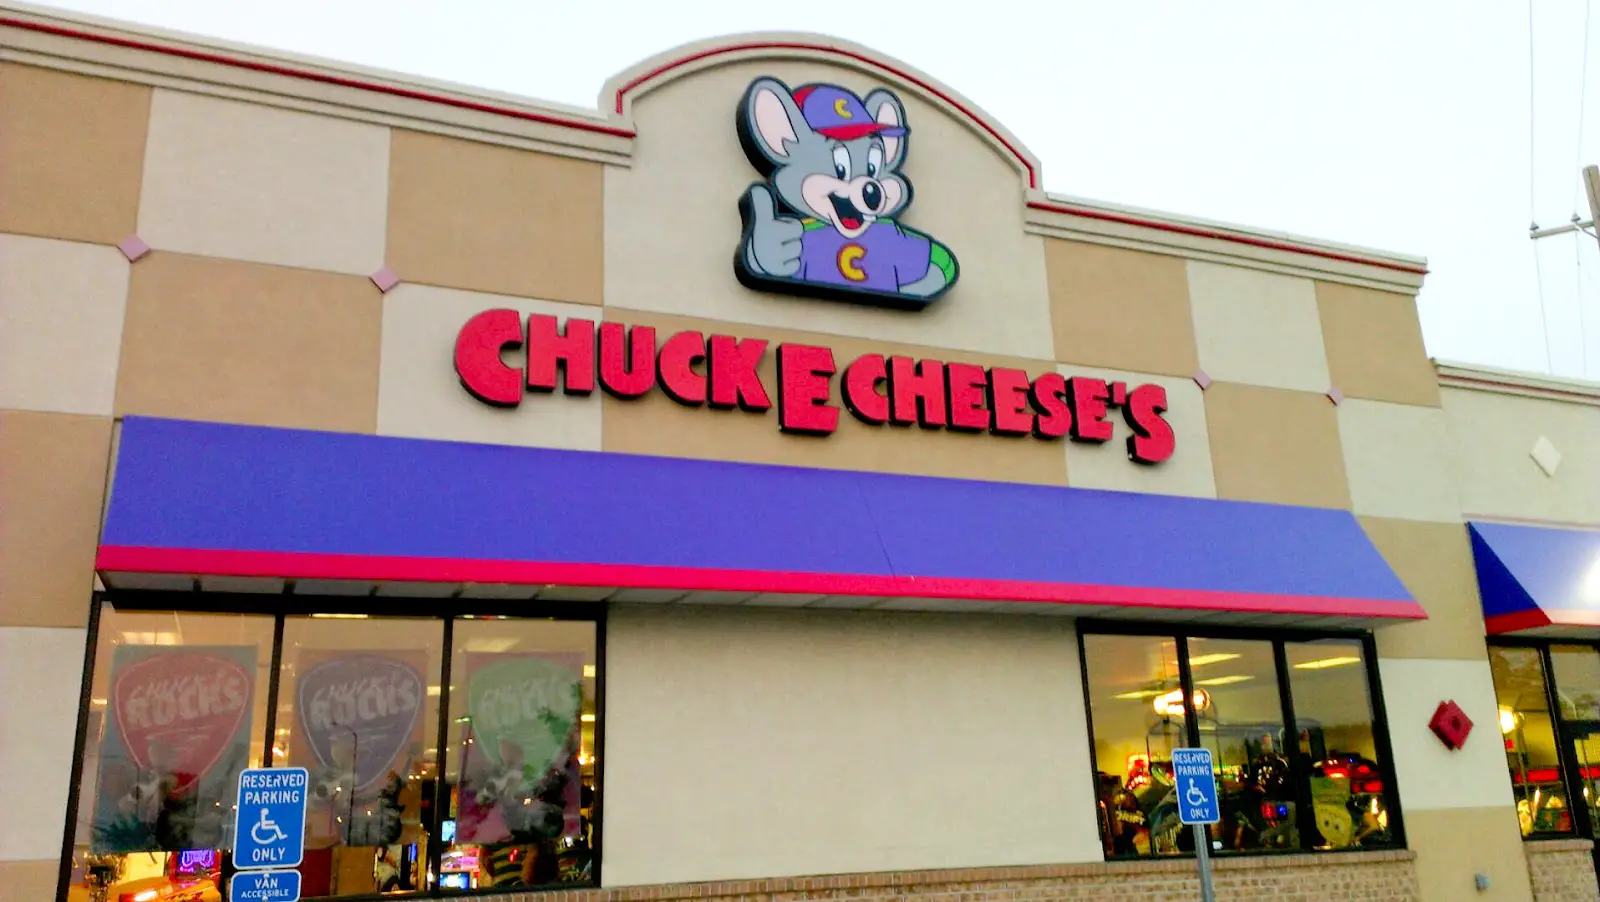 Chuck E Cheese Franchise Rich In Business Opportunities For Family Fun